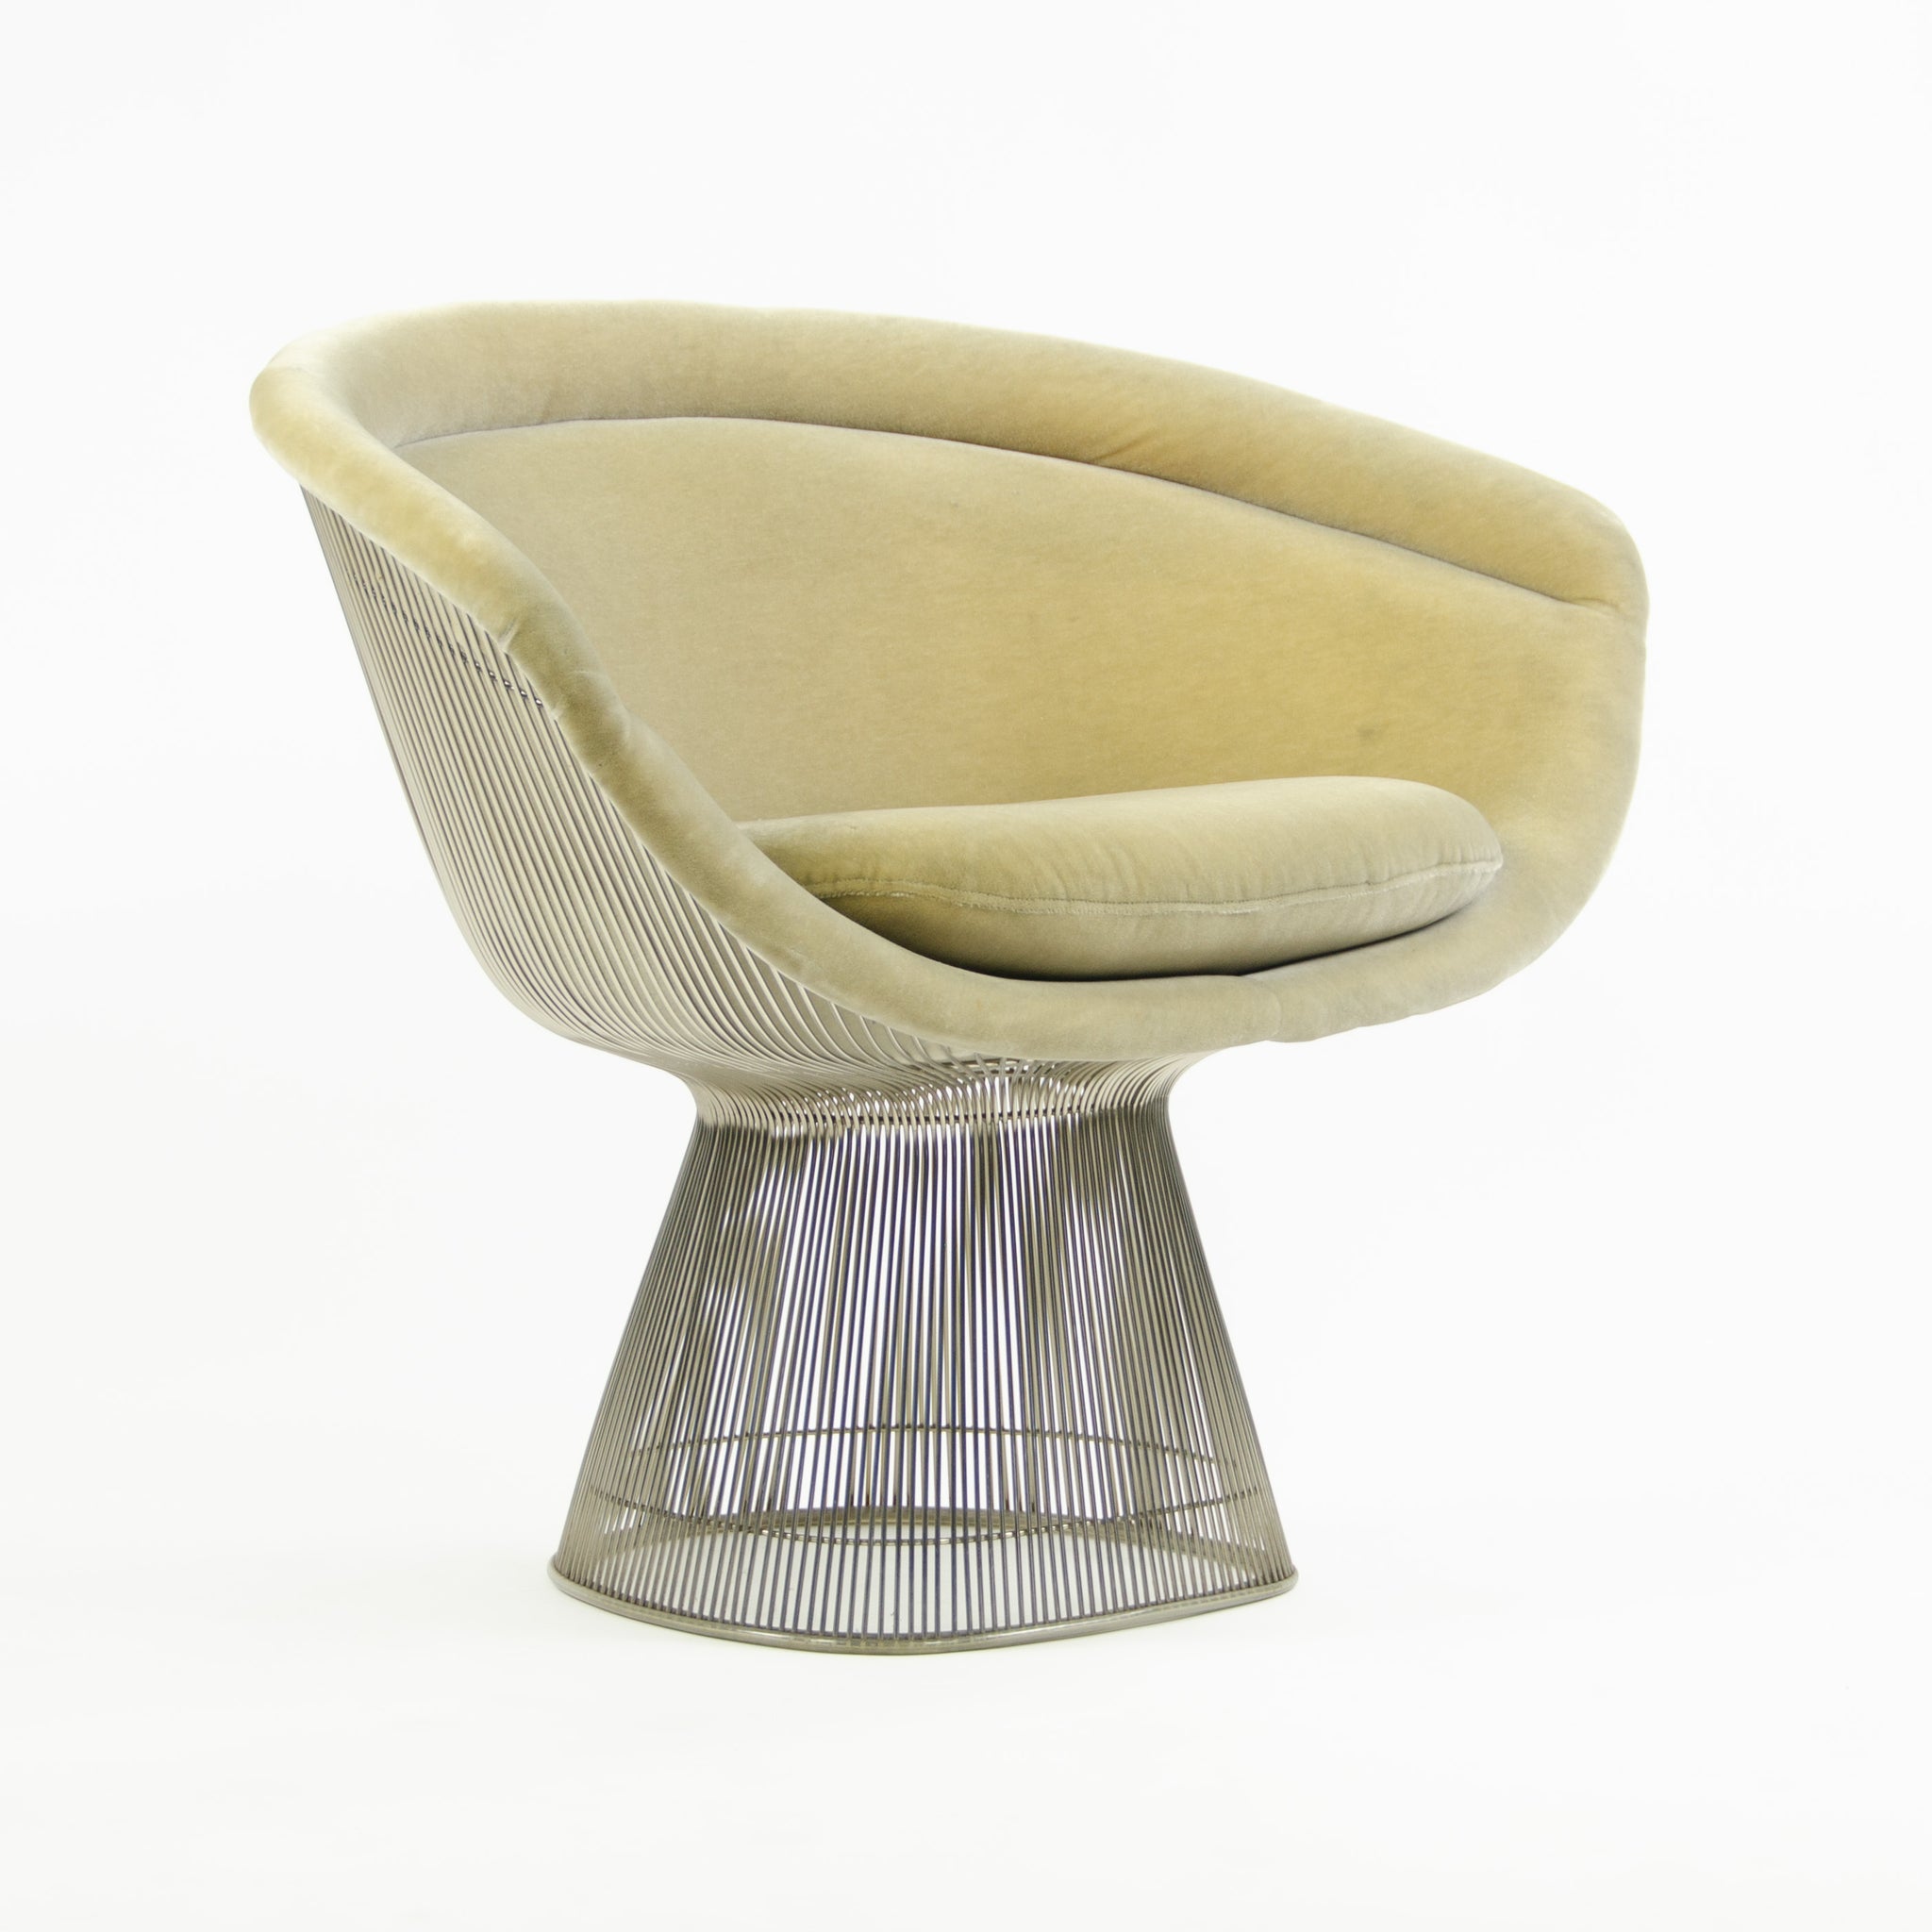 SOLD Knoll Studio 2000's Warren Platner Wire Lounge Chair Mohair Upholstery